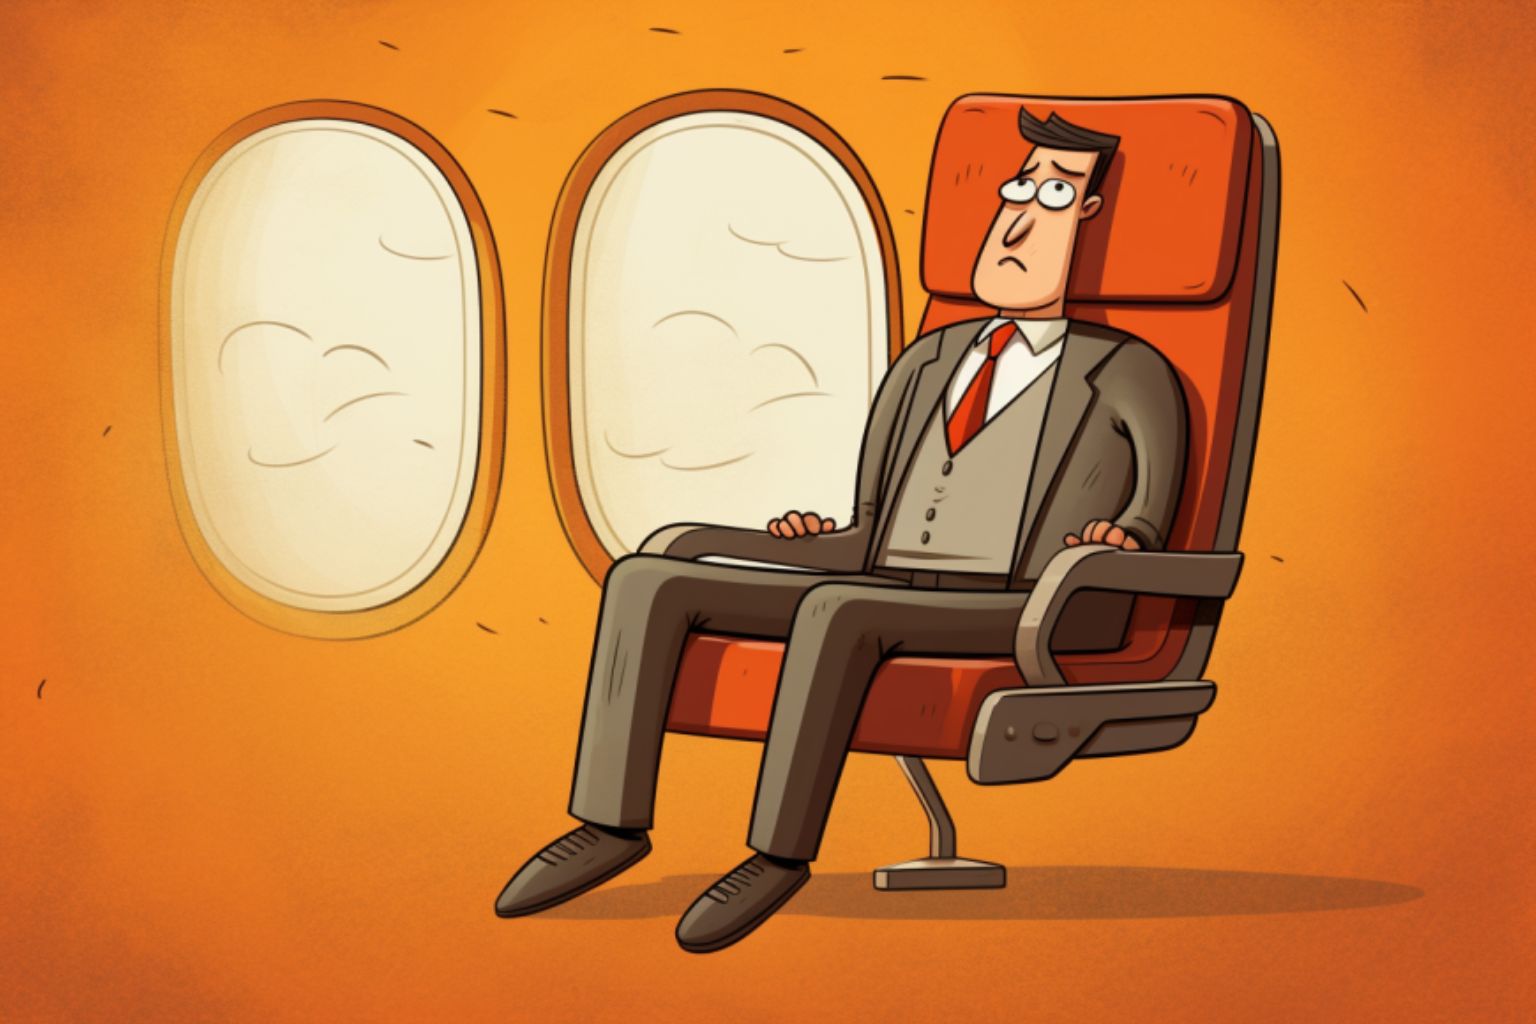 Brooks is 6' 7". The average economy class seat "pitch" on a Spirit Airlines Airbus A321 -- is between 30 and 31 inches.